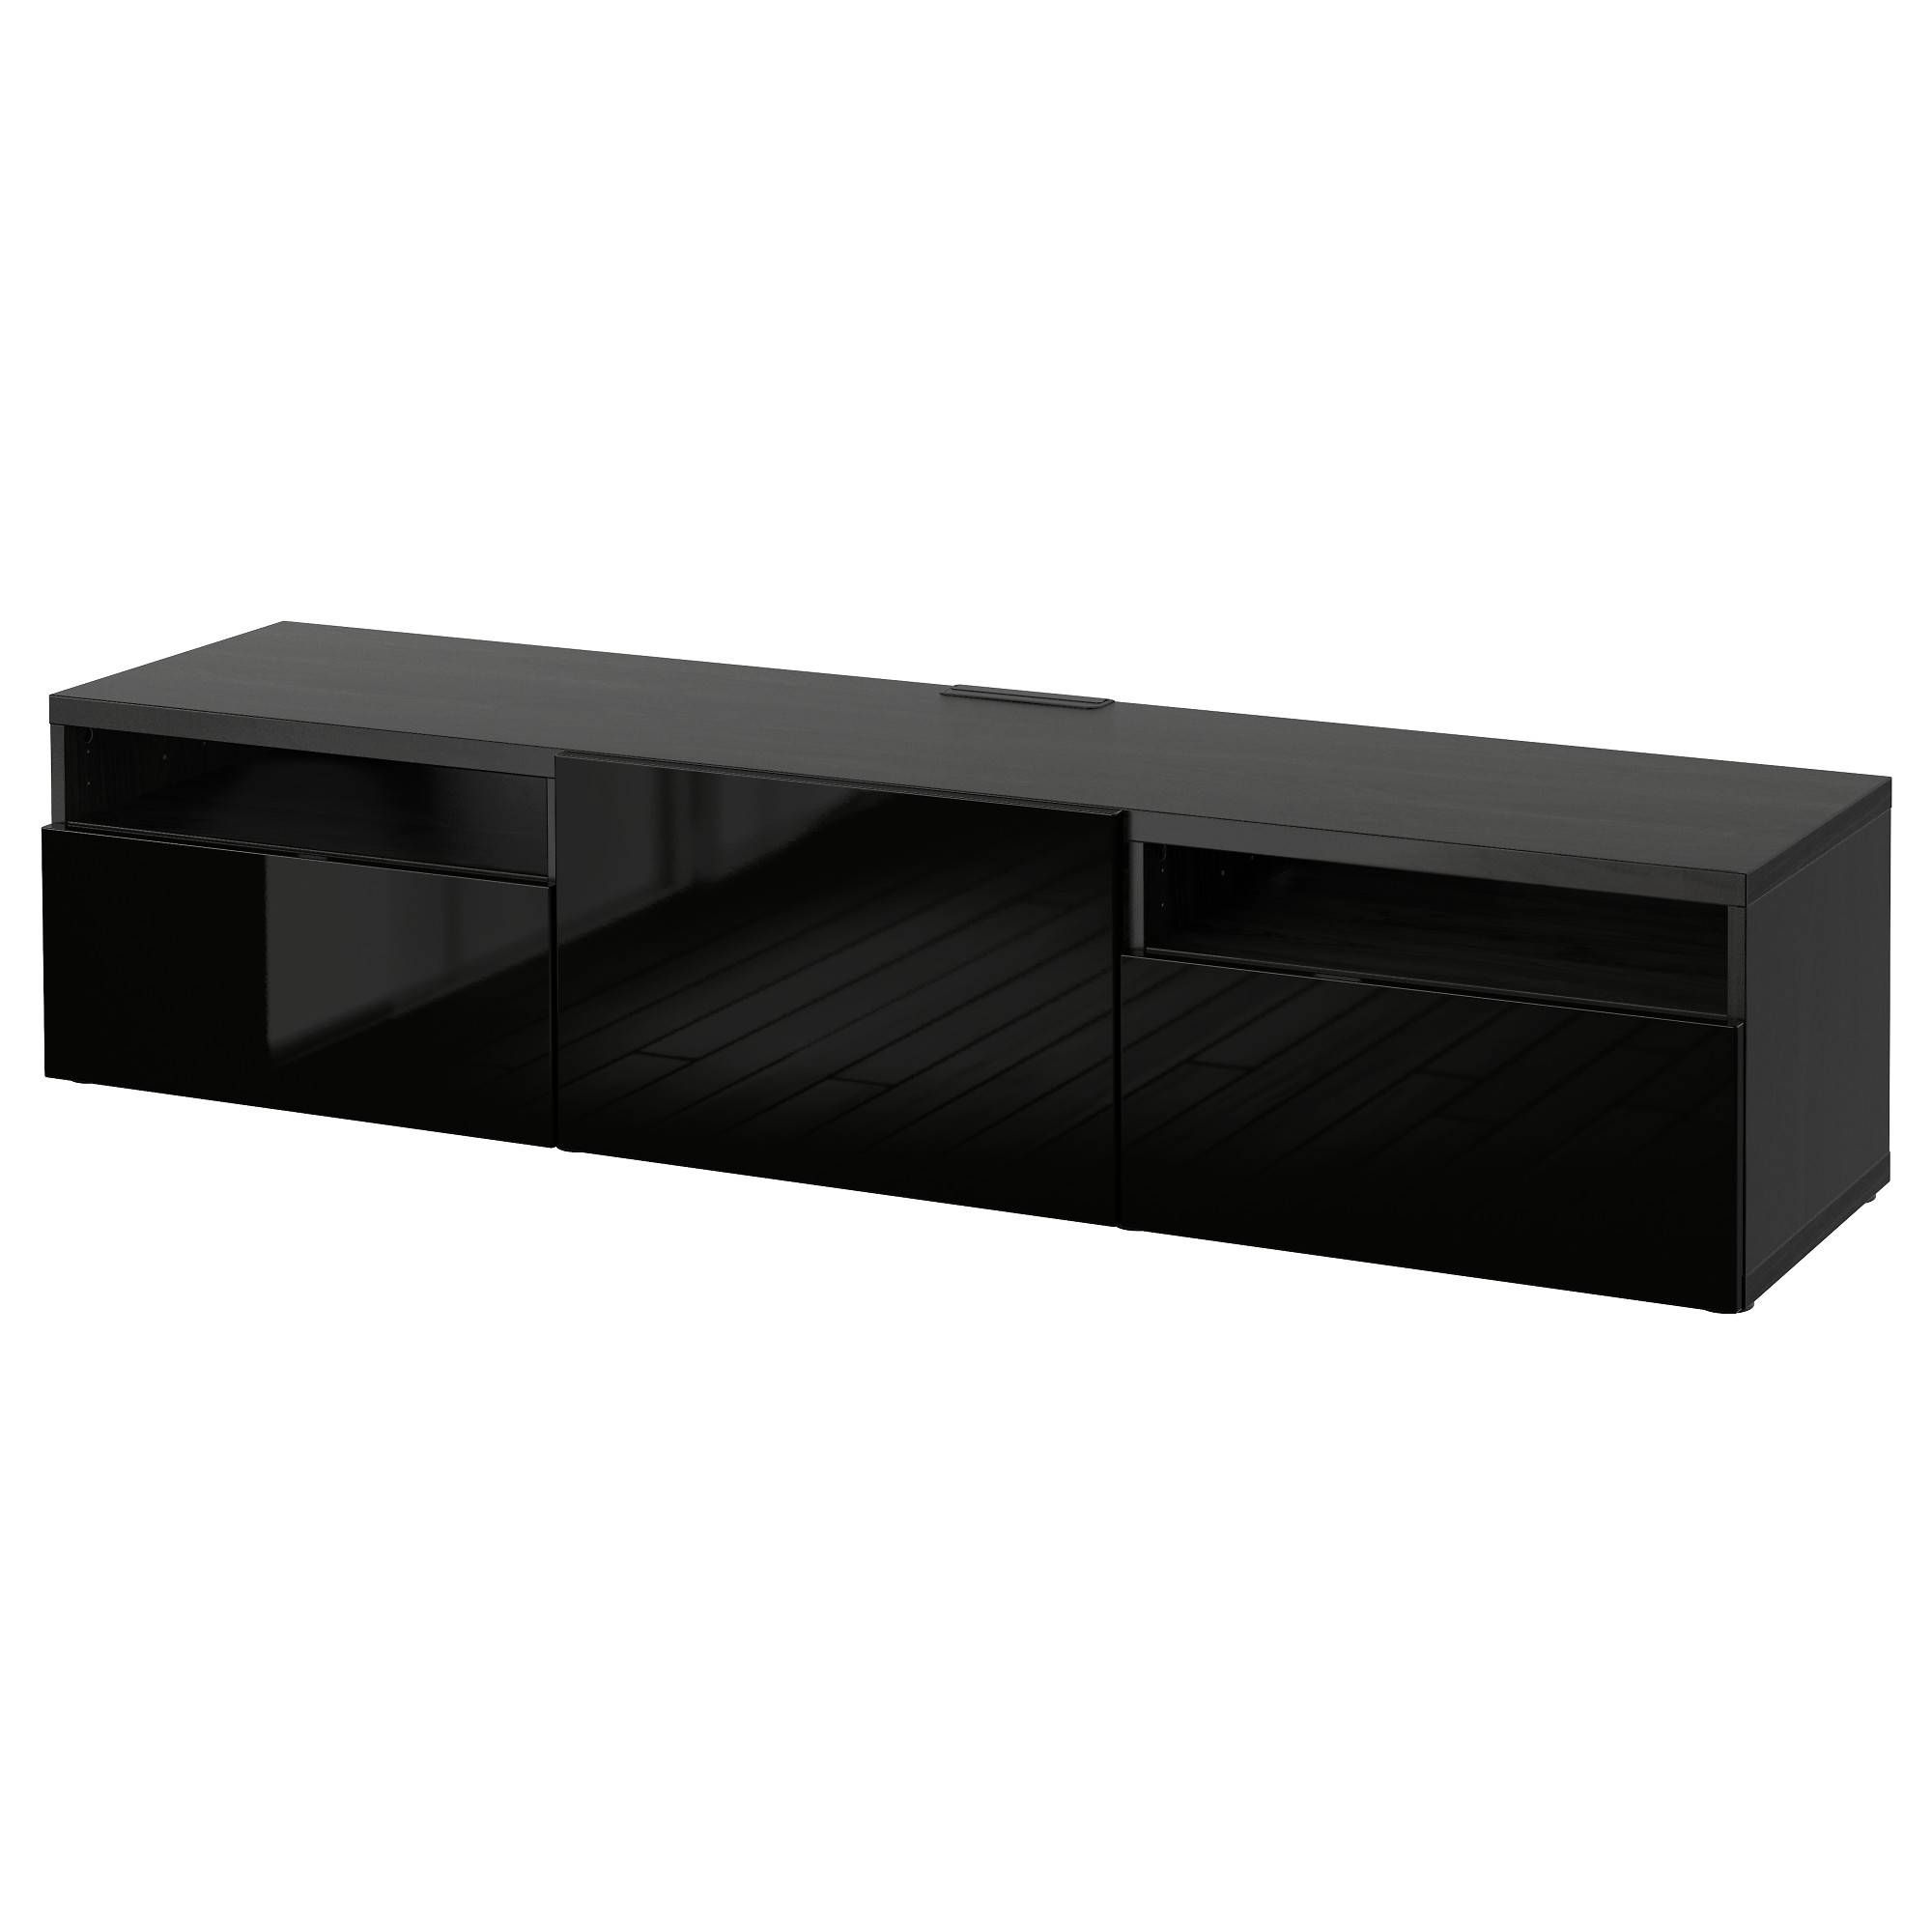 Large Tv Stands & Entertainment Centers – Ikea Regarding Long Black Tv Stands (View 12 of 15)